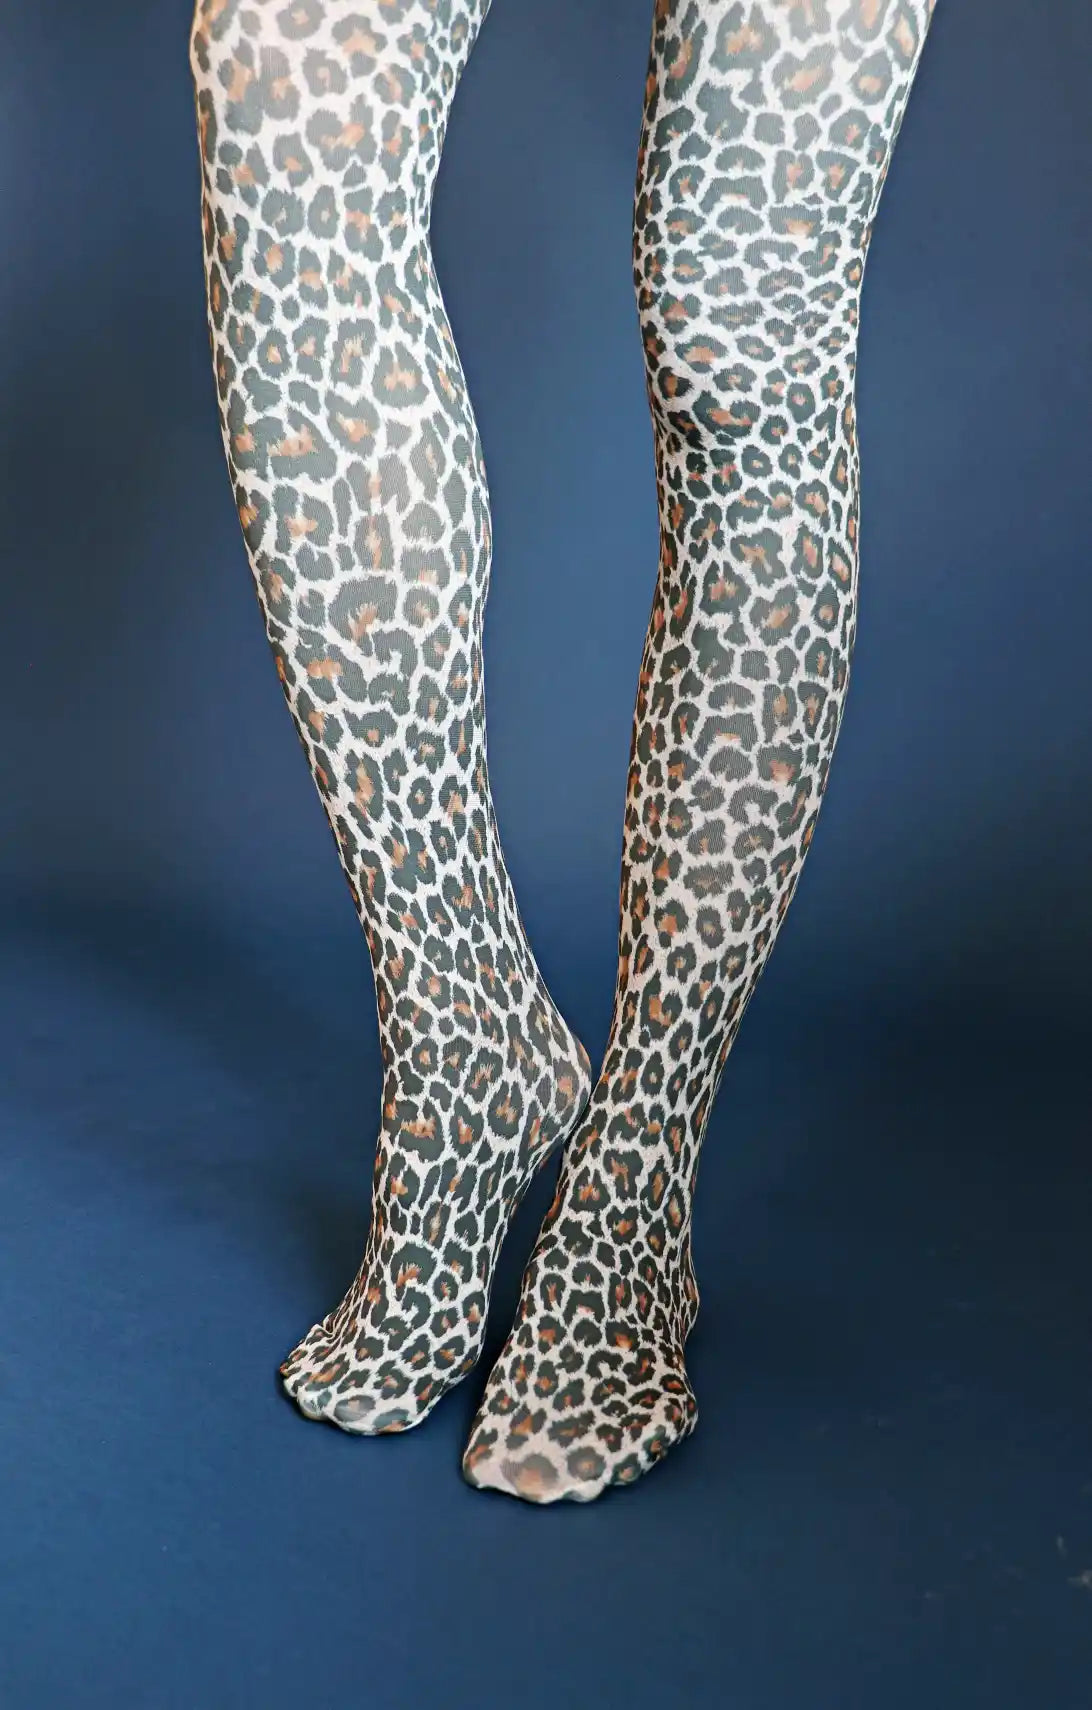 Tights for Women with Leopard Print, Patterned Leopard Tights